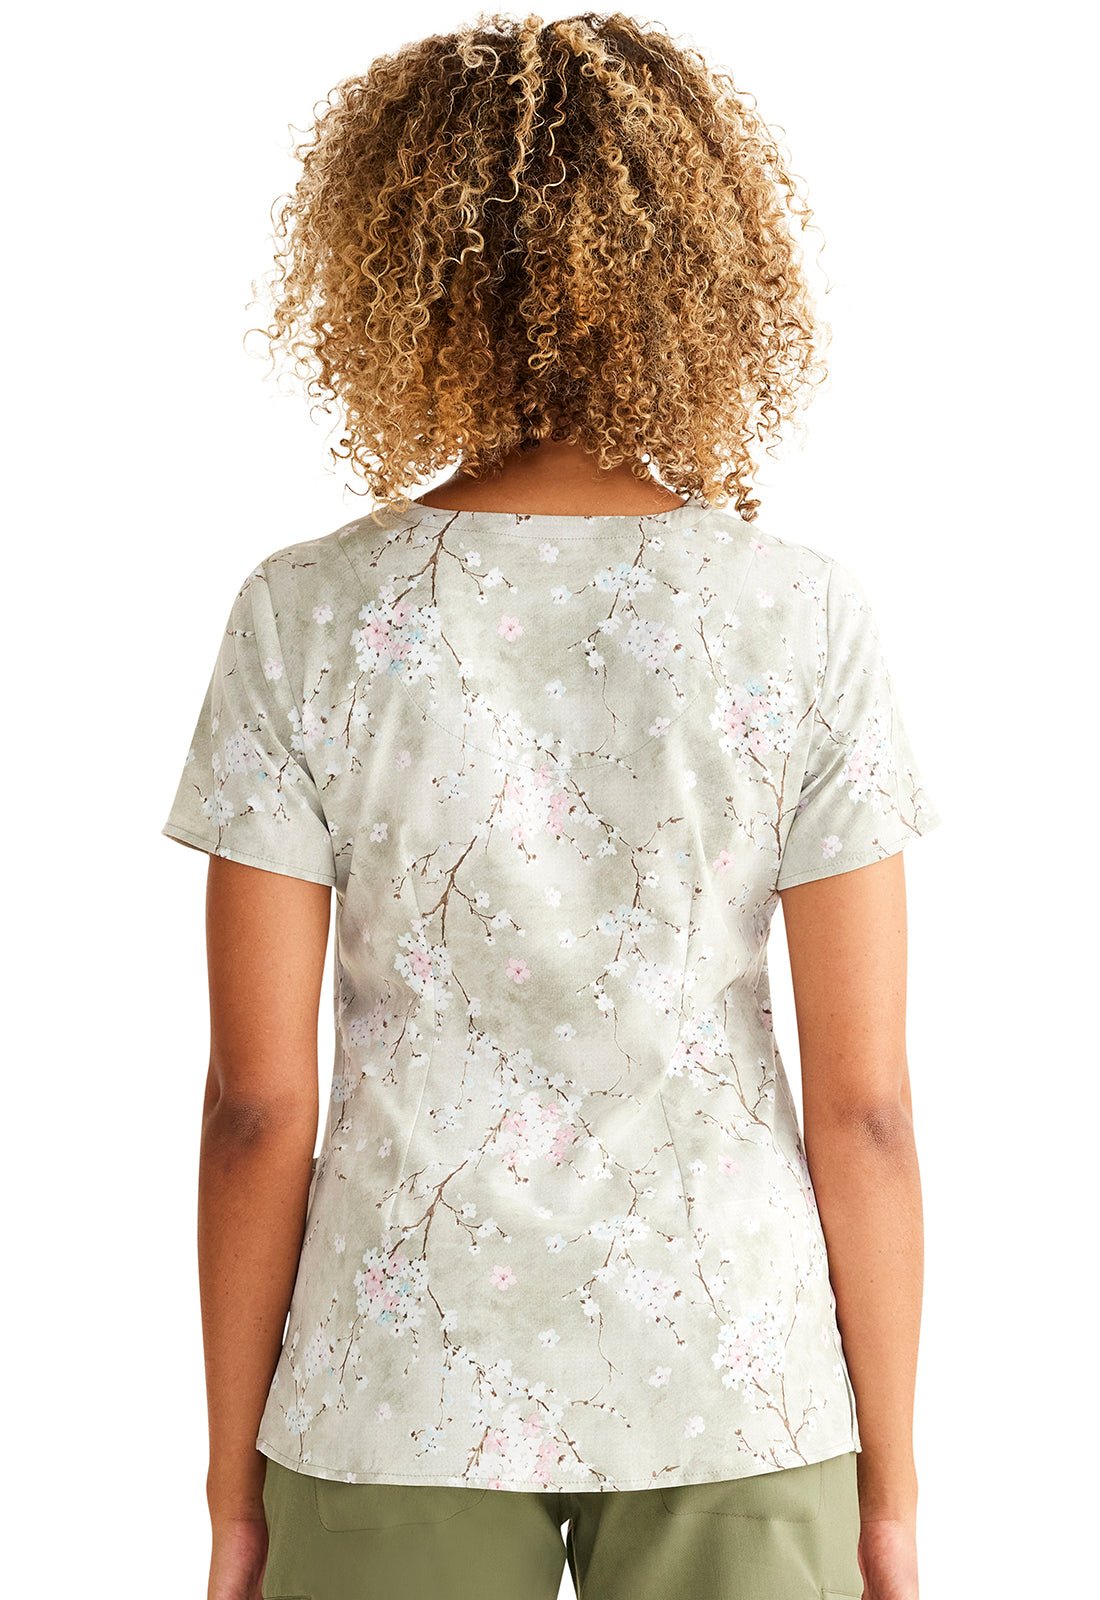 Charmed Florals Healing Hands Limited Edition V Neck Scrub Top HH903 CRMF - Scrubs Select